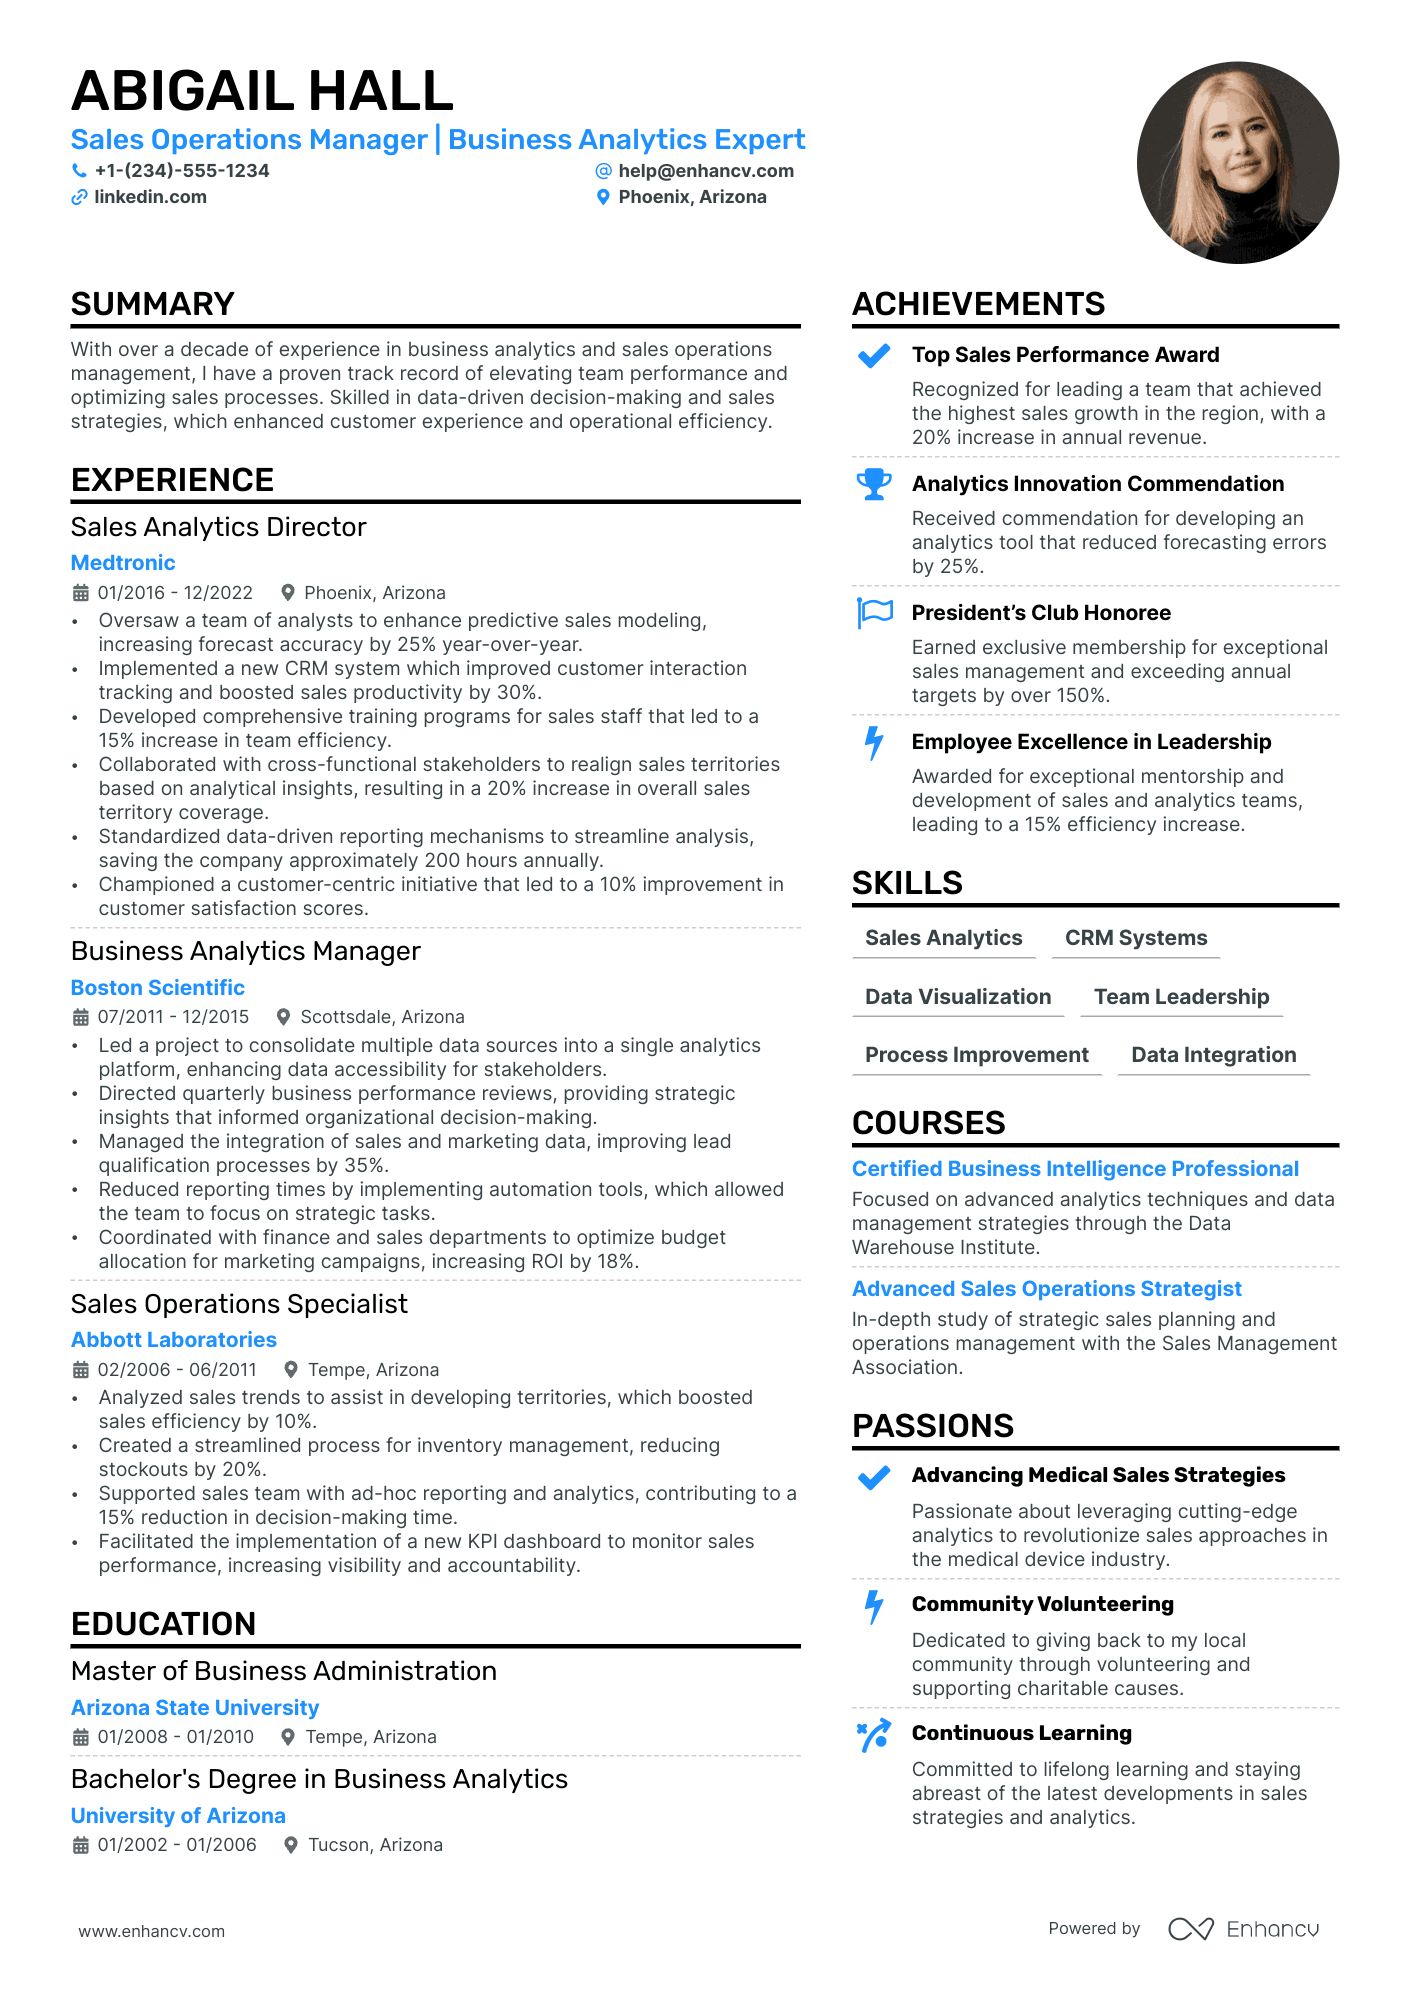 Sales Operations Manager resume example